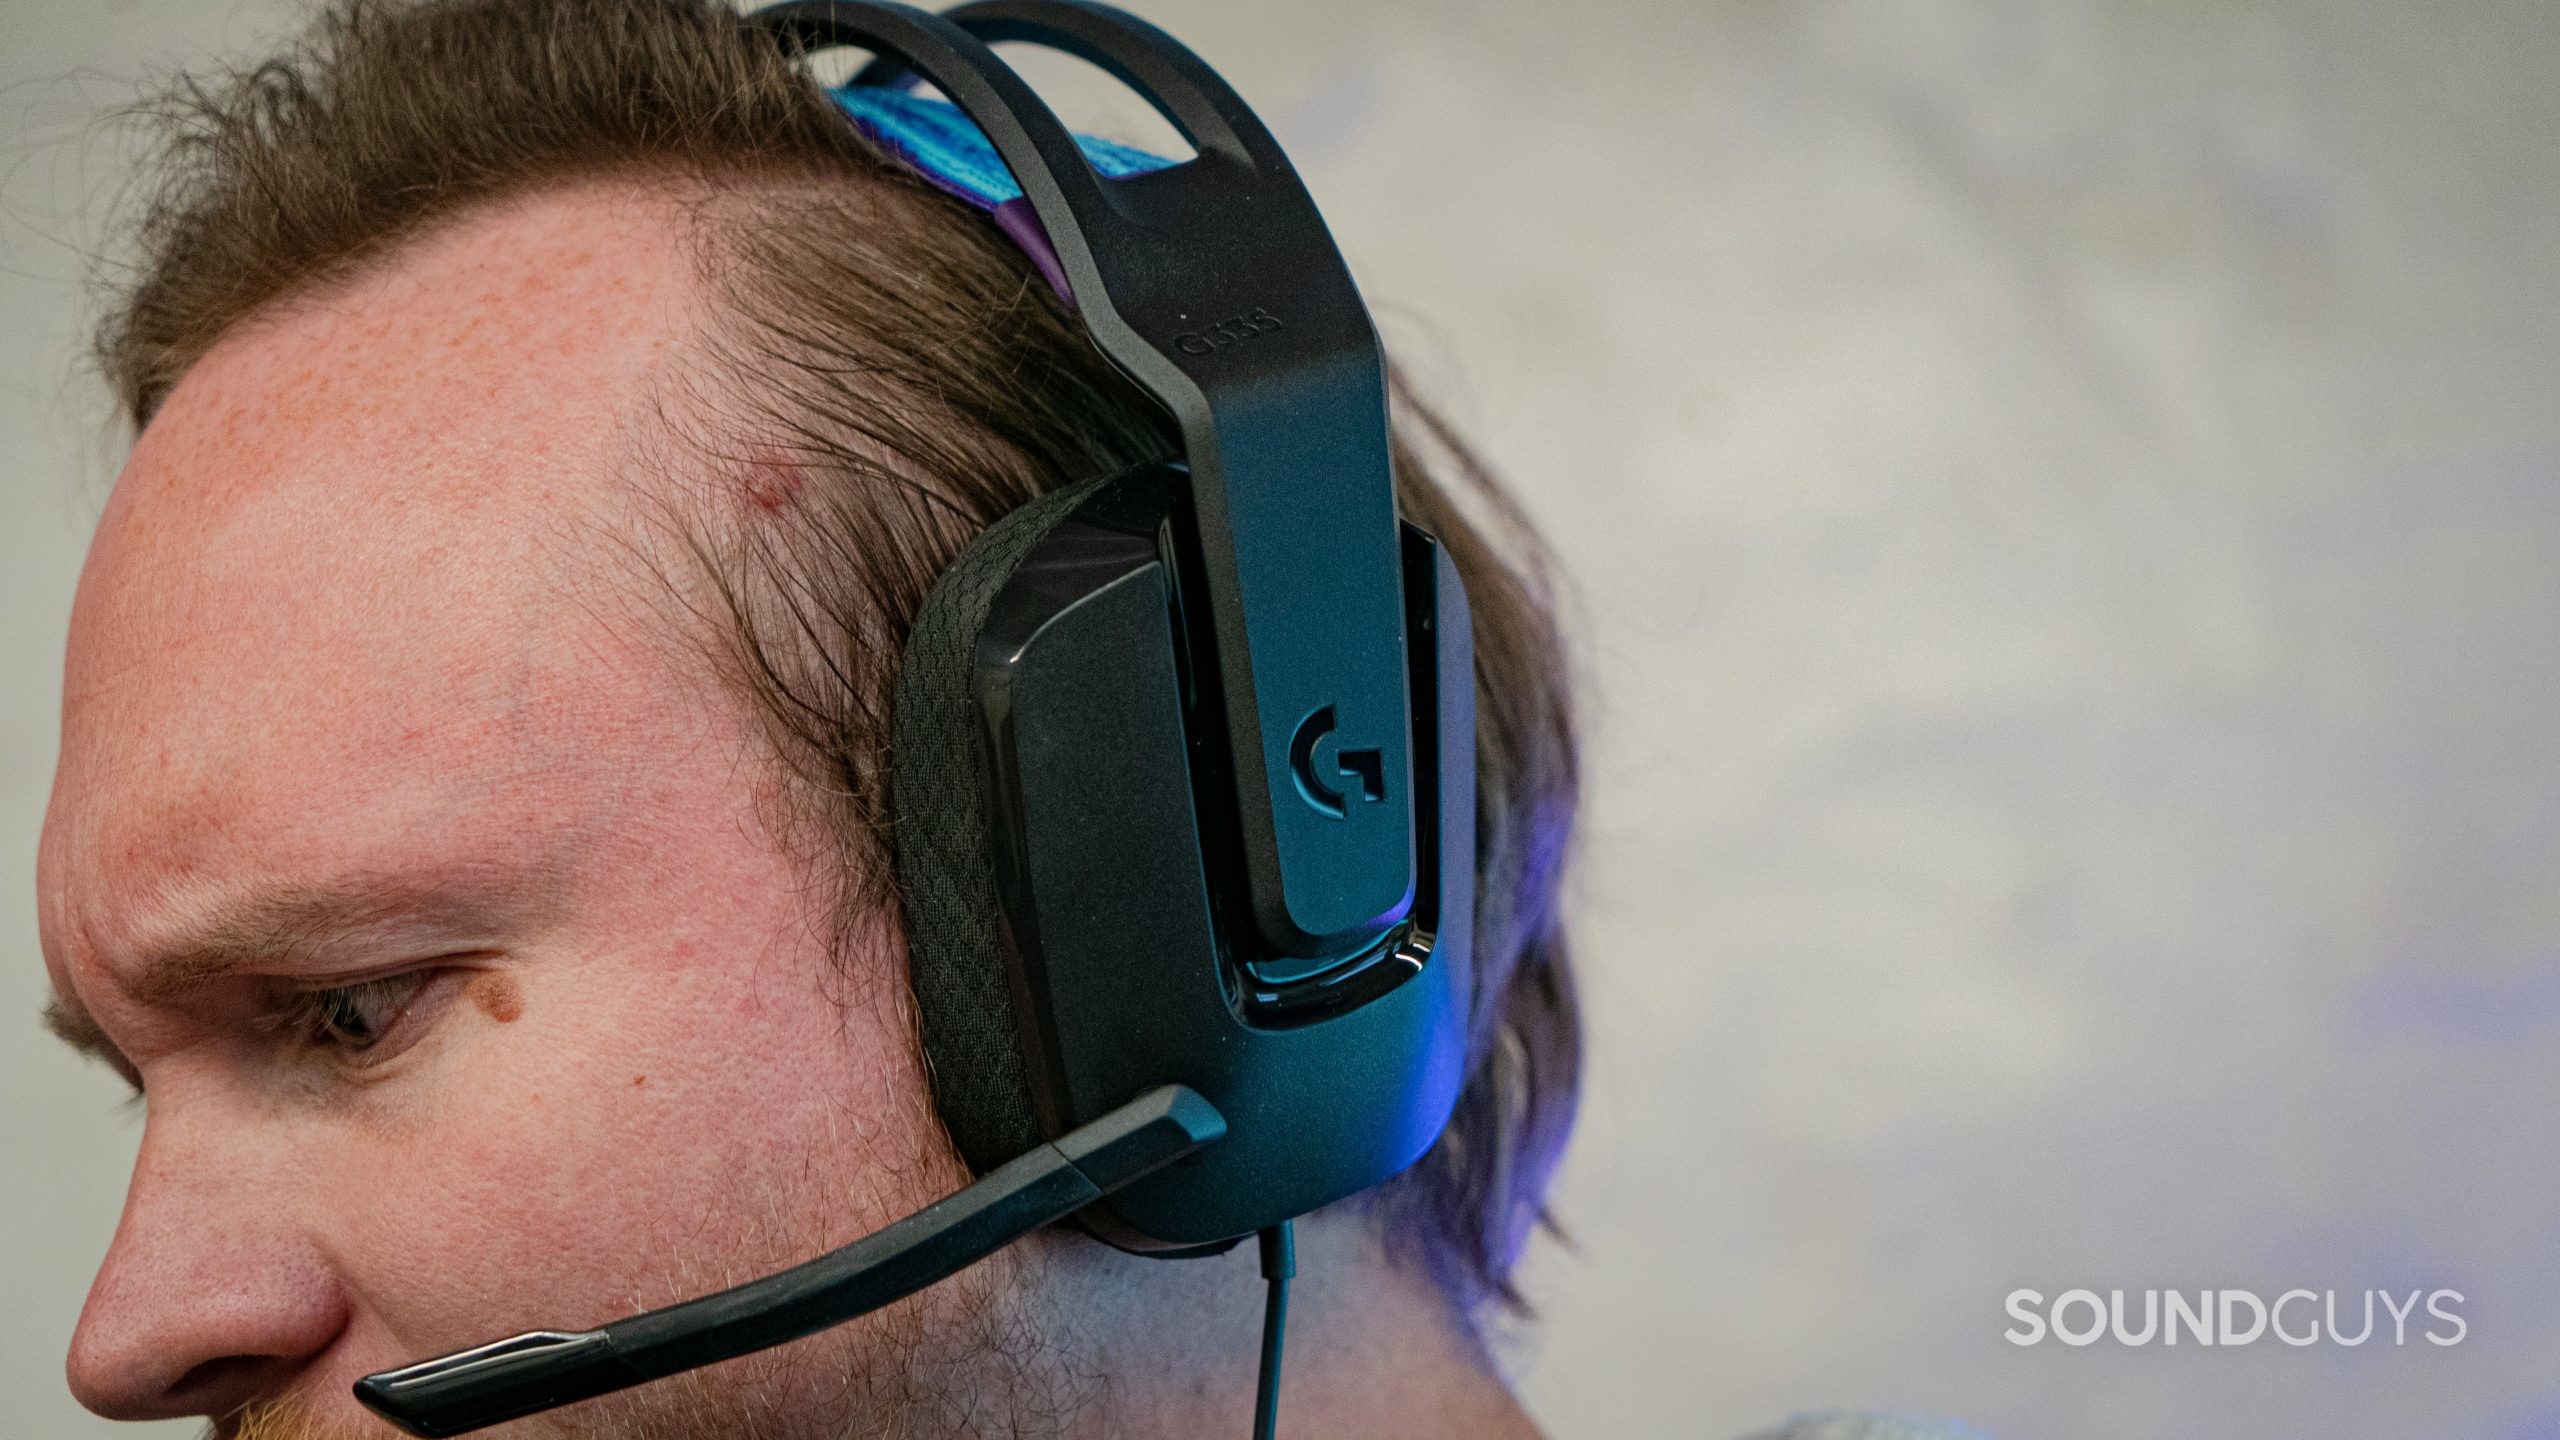 The Logitech G335 being worn on a man's head with the microphone extended down.